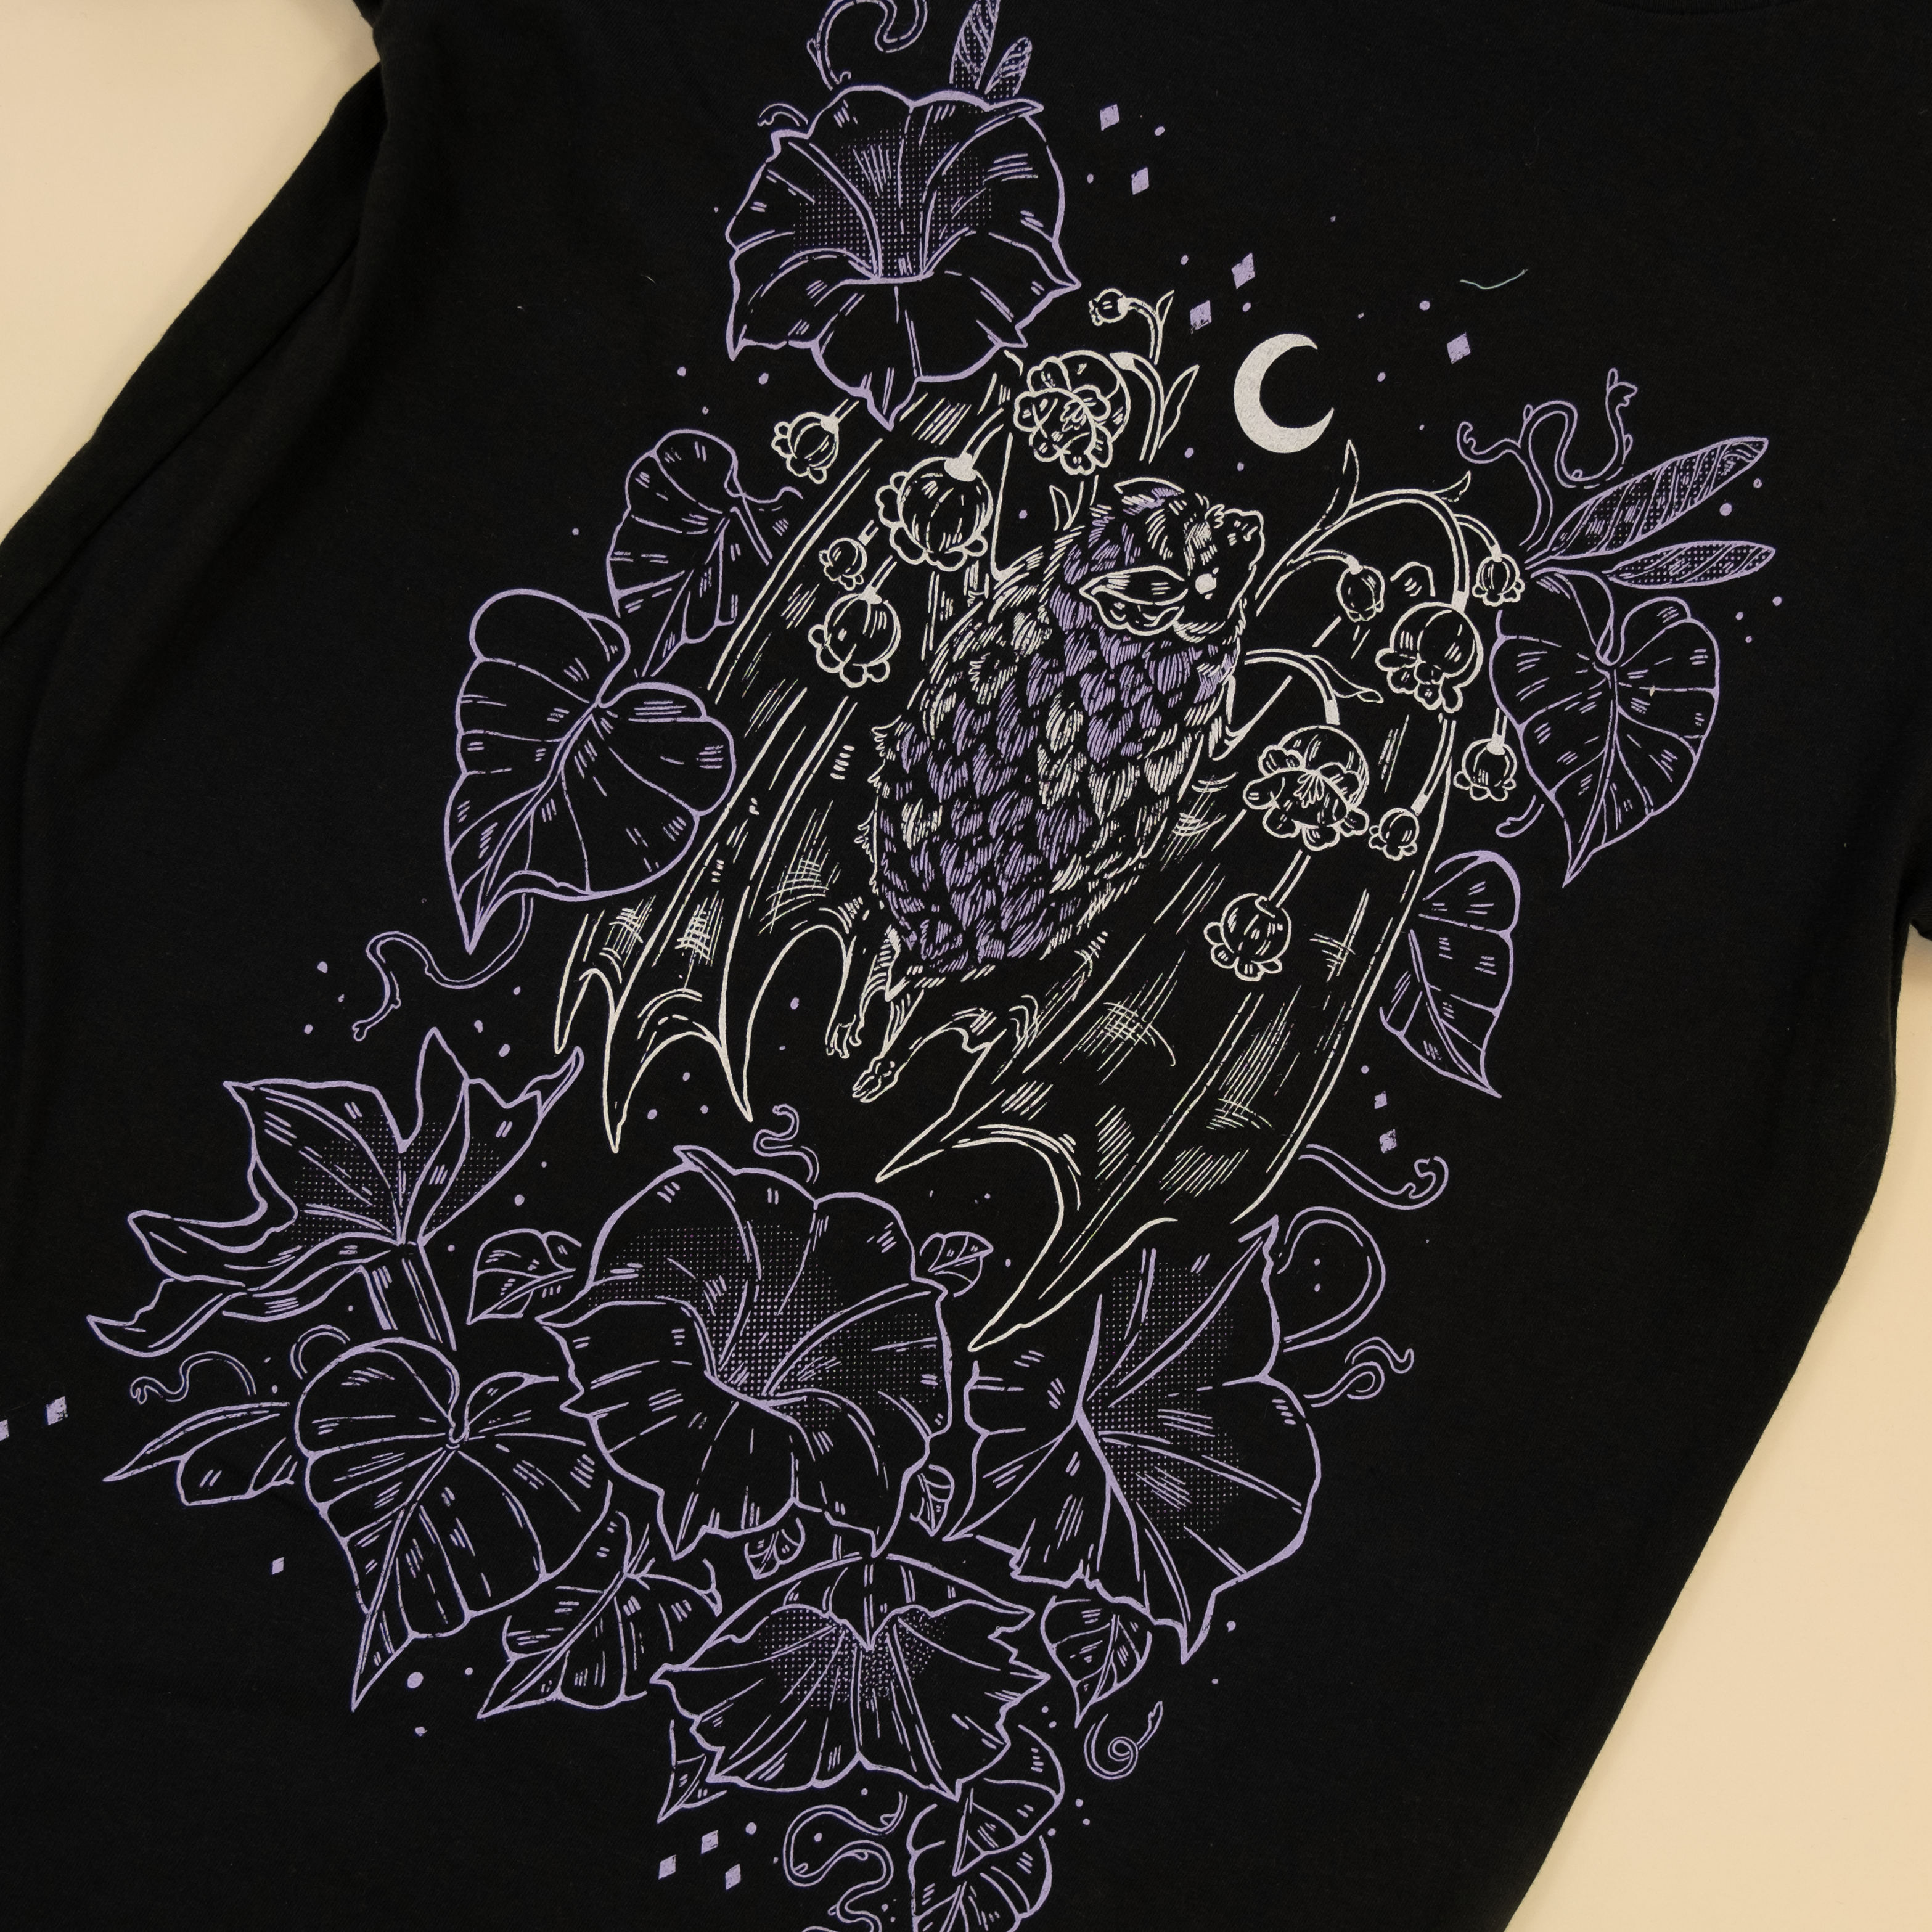 [SCREENPRINTED TEE SHIRT] Nocturne **WILL SHIP AFTER 3/27